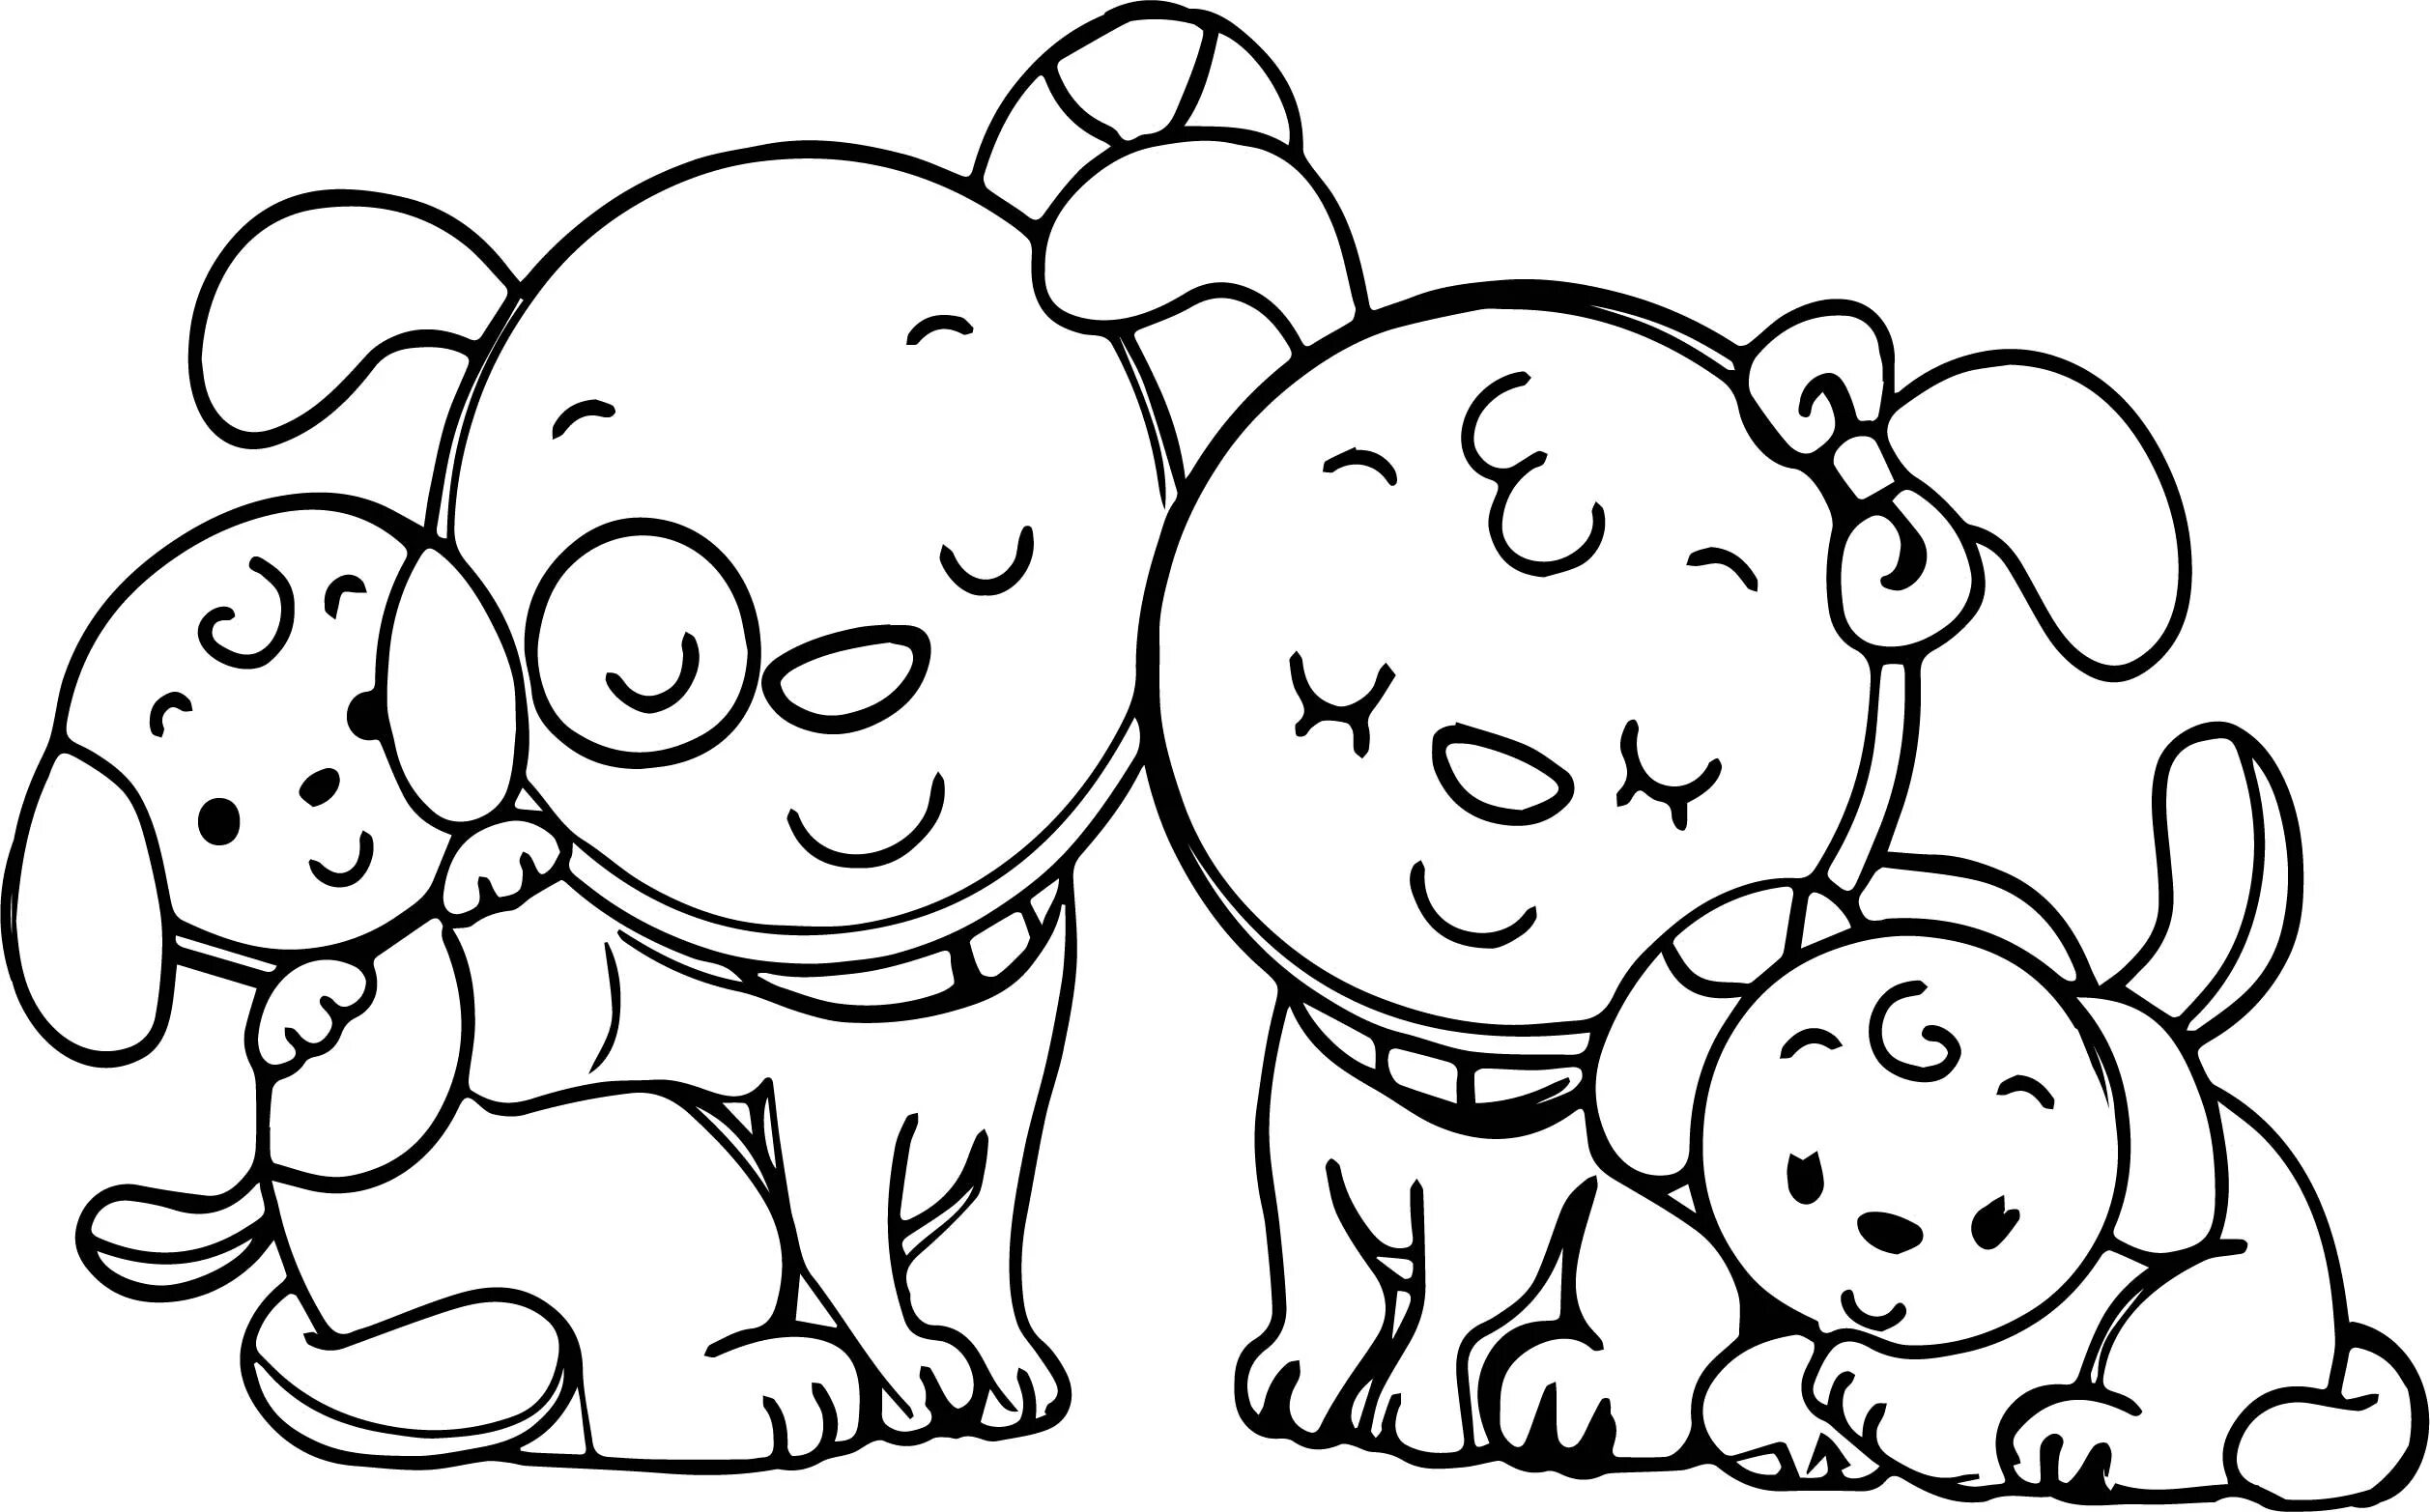 Snuggubble dog family coloring page